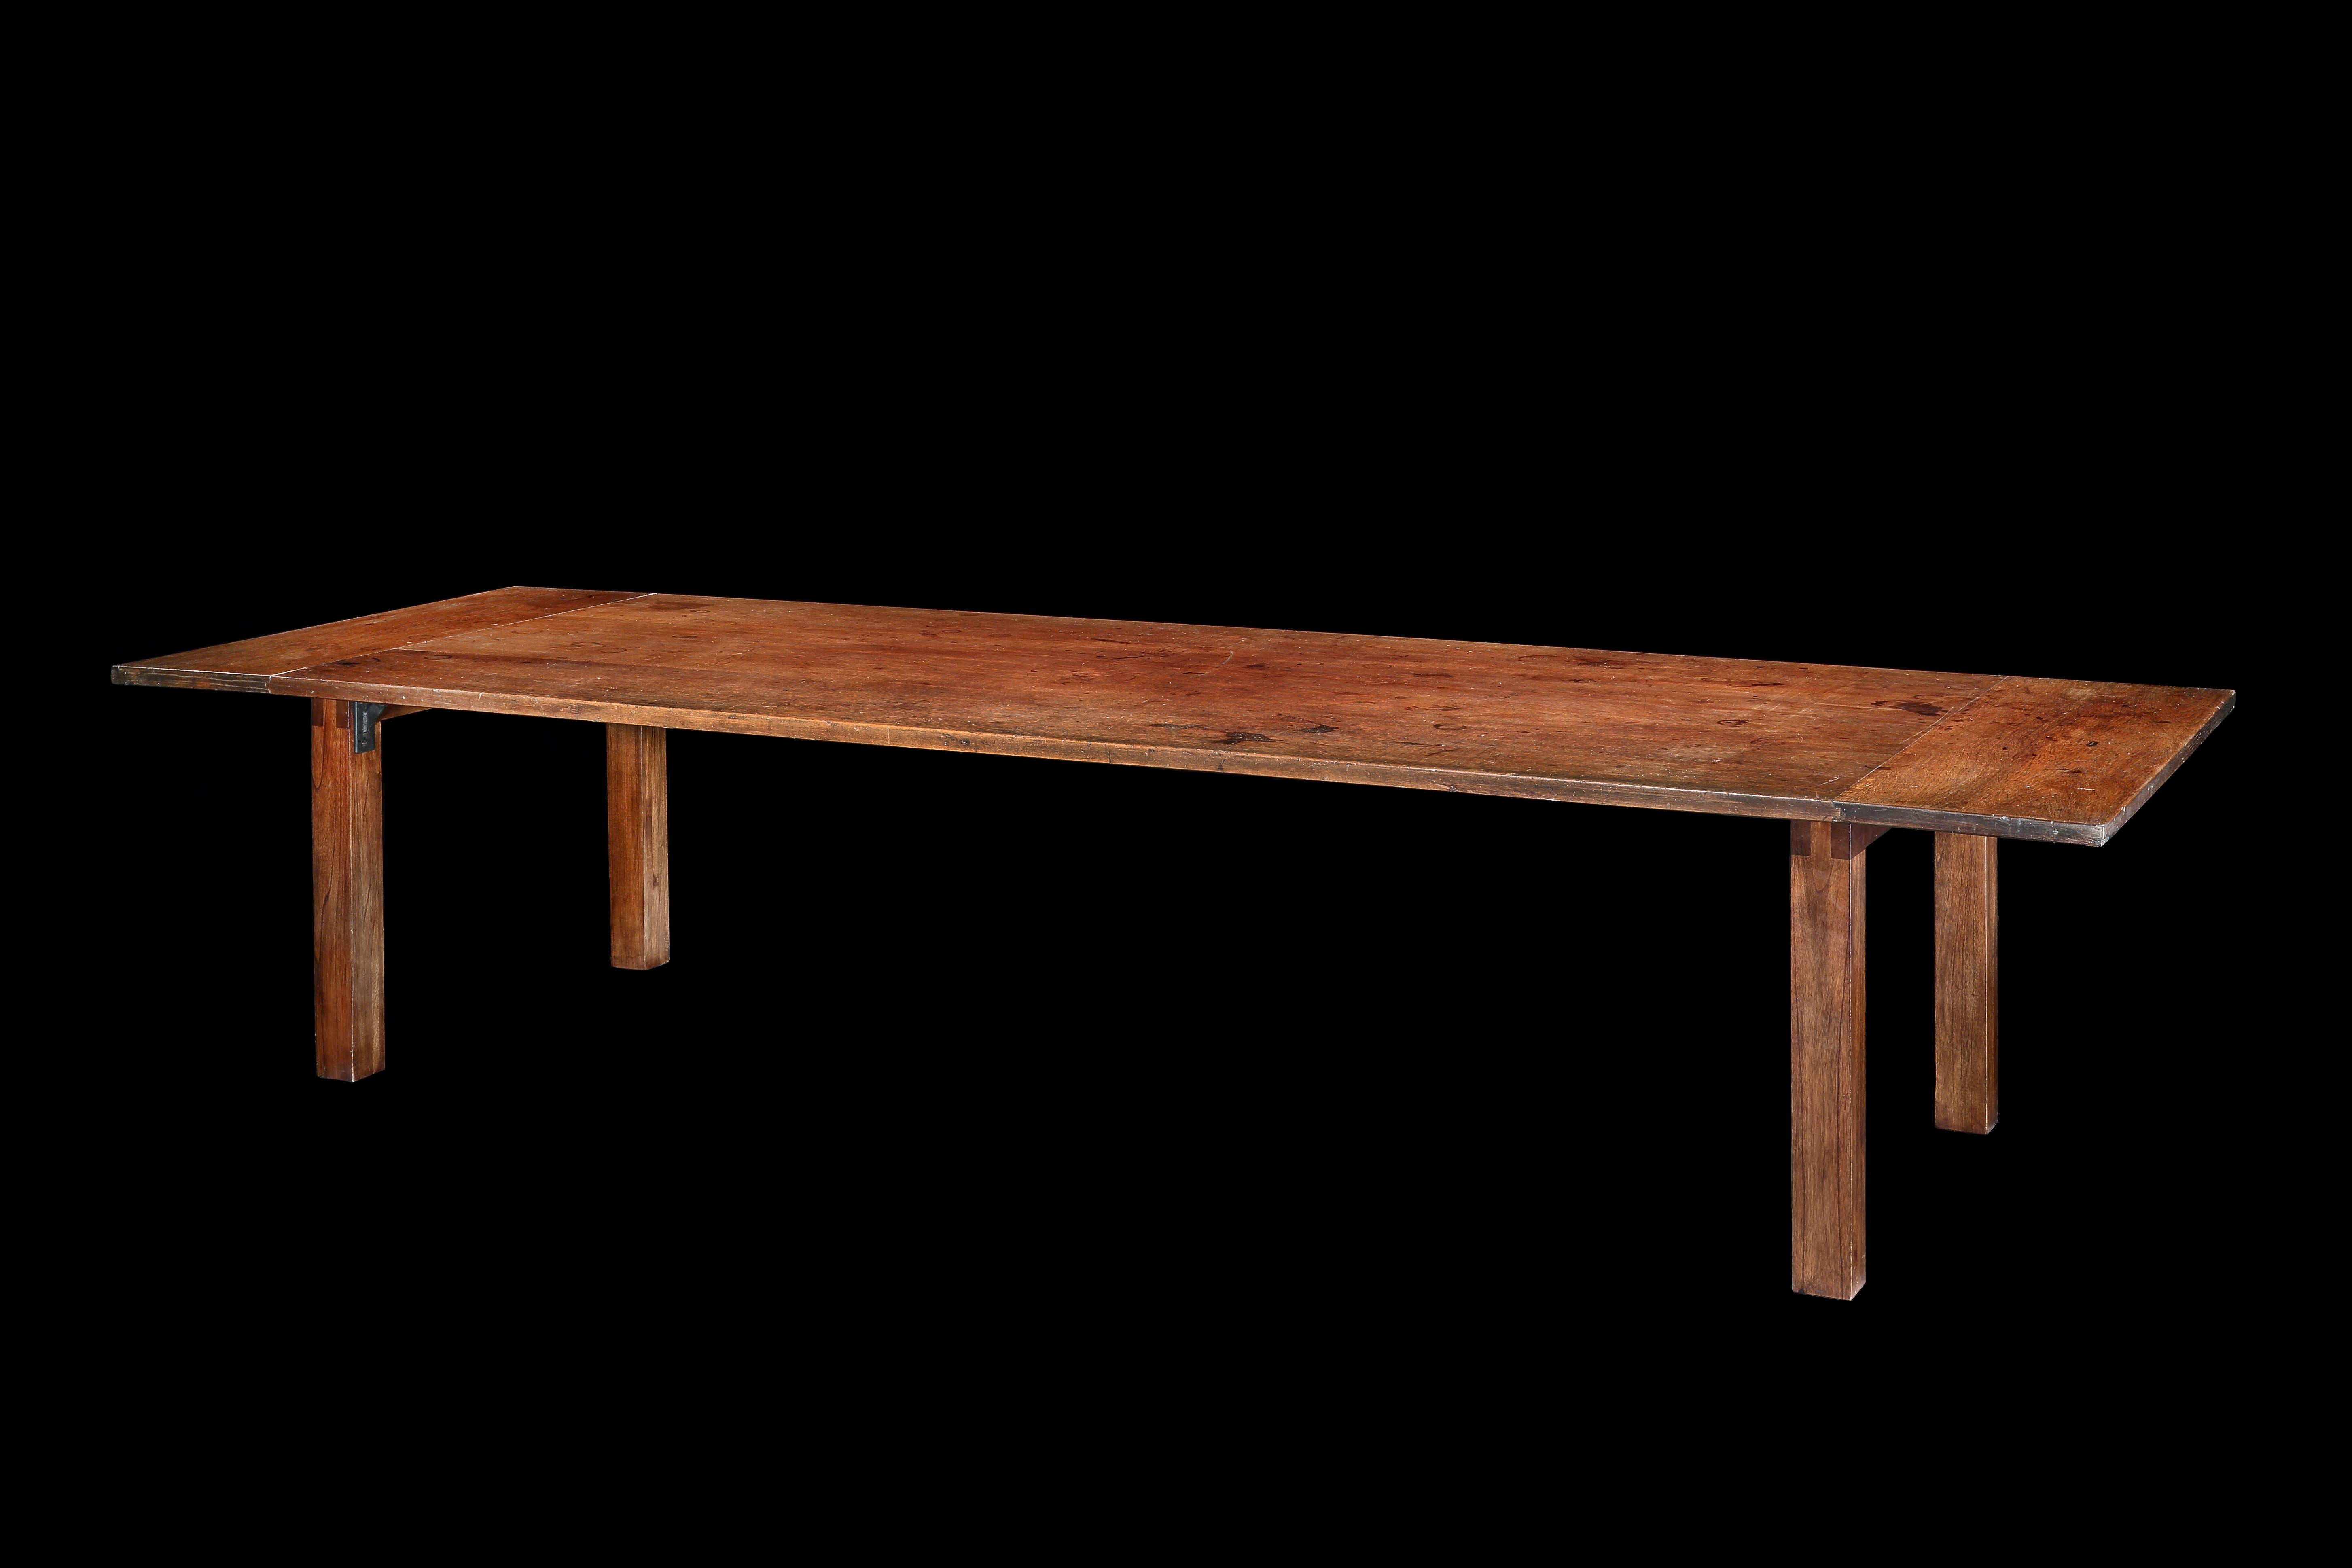 An exceptionally, rare & massive, 20-24-seat, Mid-Century Modern, solid, teak, table

- Exceptionally rare size, very few period tables are 4ft wide; Classic modern, uncluttered, design showcasing the rich lustrous color and beautiful figuring of